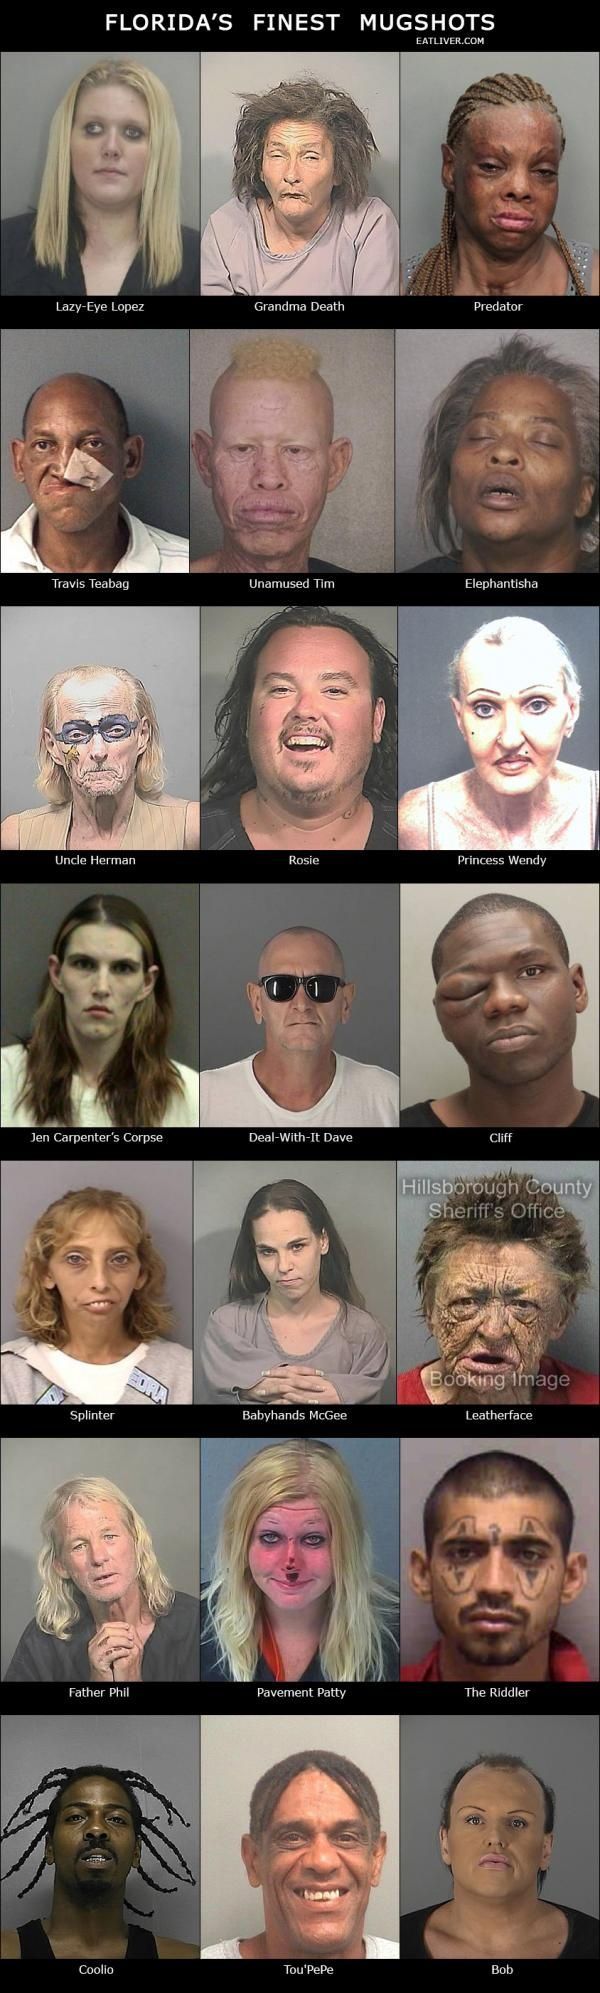 Florida’s Finest Mugshots – Seriously, For Real?